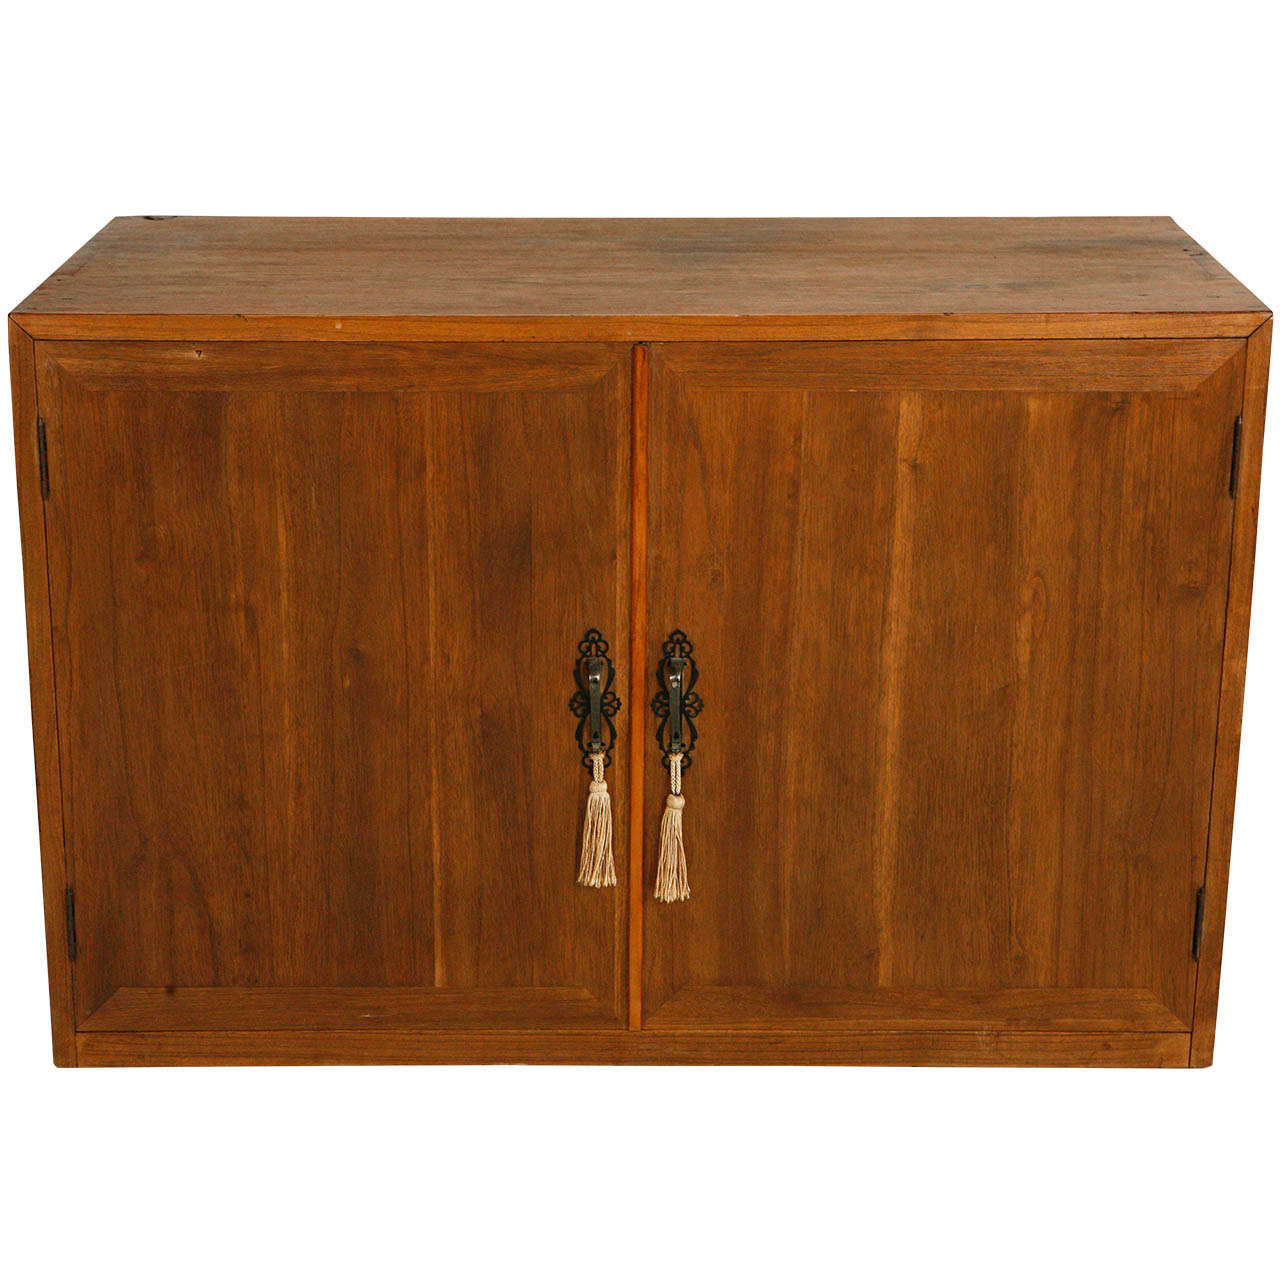 Japanese Tansu with Five Interior Sliding Drawers